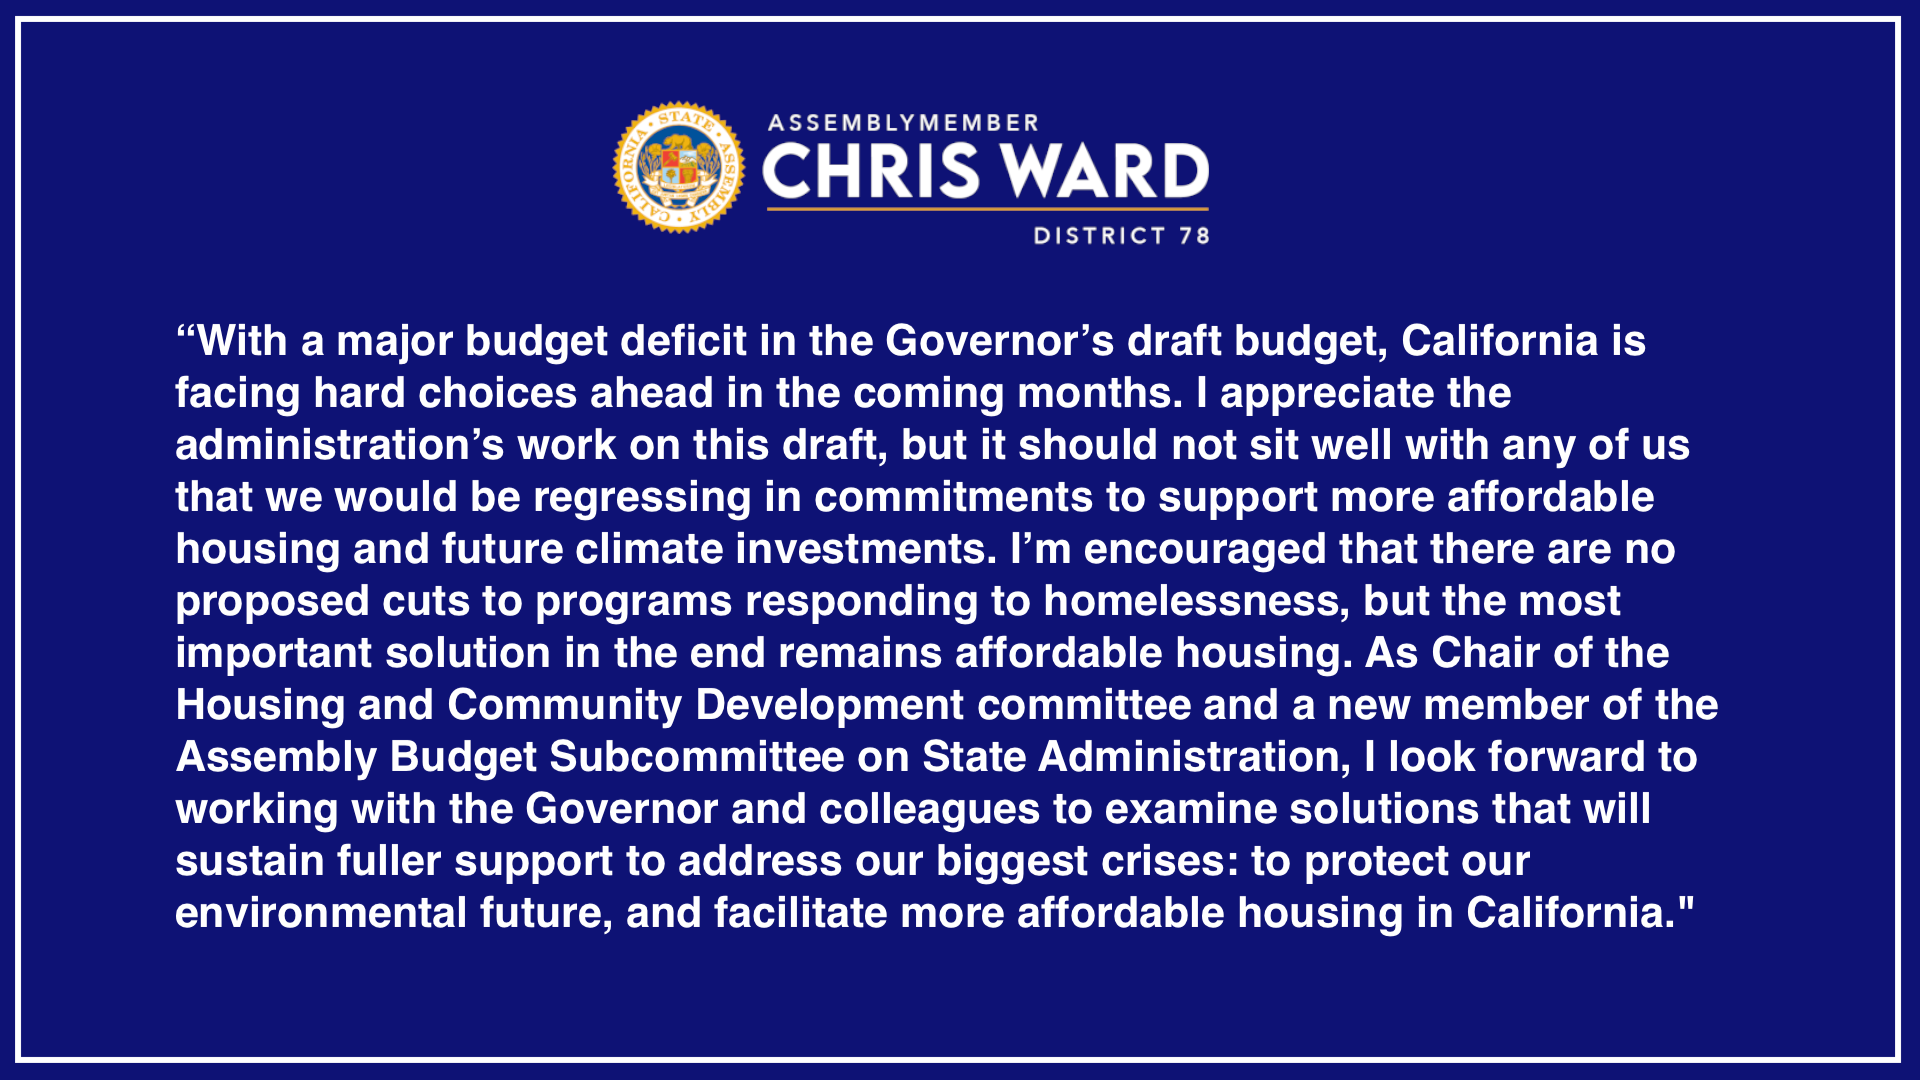 “With a major budget deficit in the Governor’s draft budget, California is facing hard choices ahead in the coming months. I appreciate the administration’s work on this draft, but it should not sit well with any of us that we would be regressing in commitments to support more affordable housing and future climate investments. I’m encouraged that there are no proposed cuts to programs responding to homelessness, but the most important solution in the end remains affordable housing."